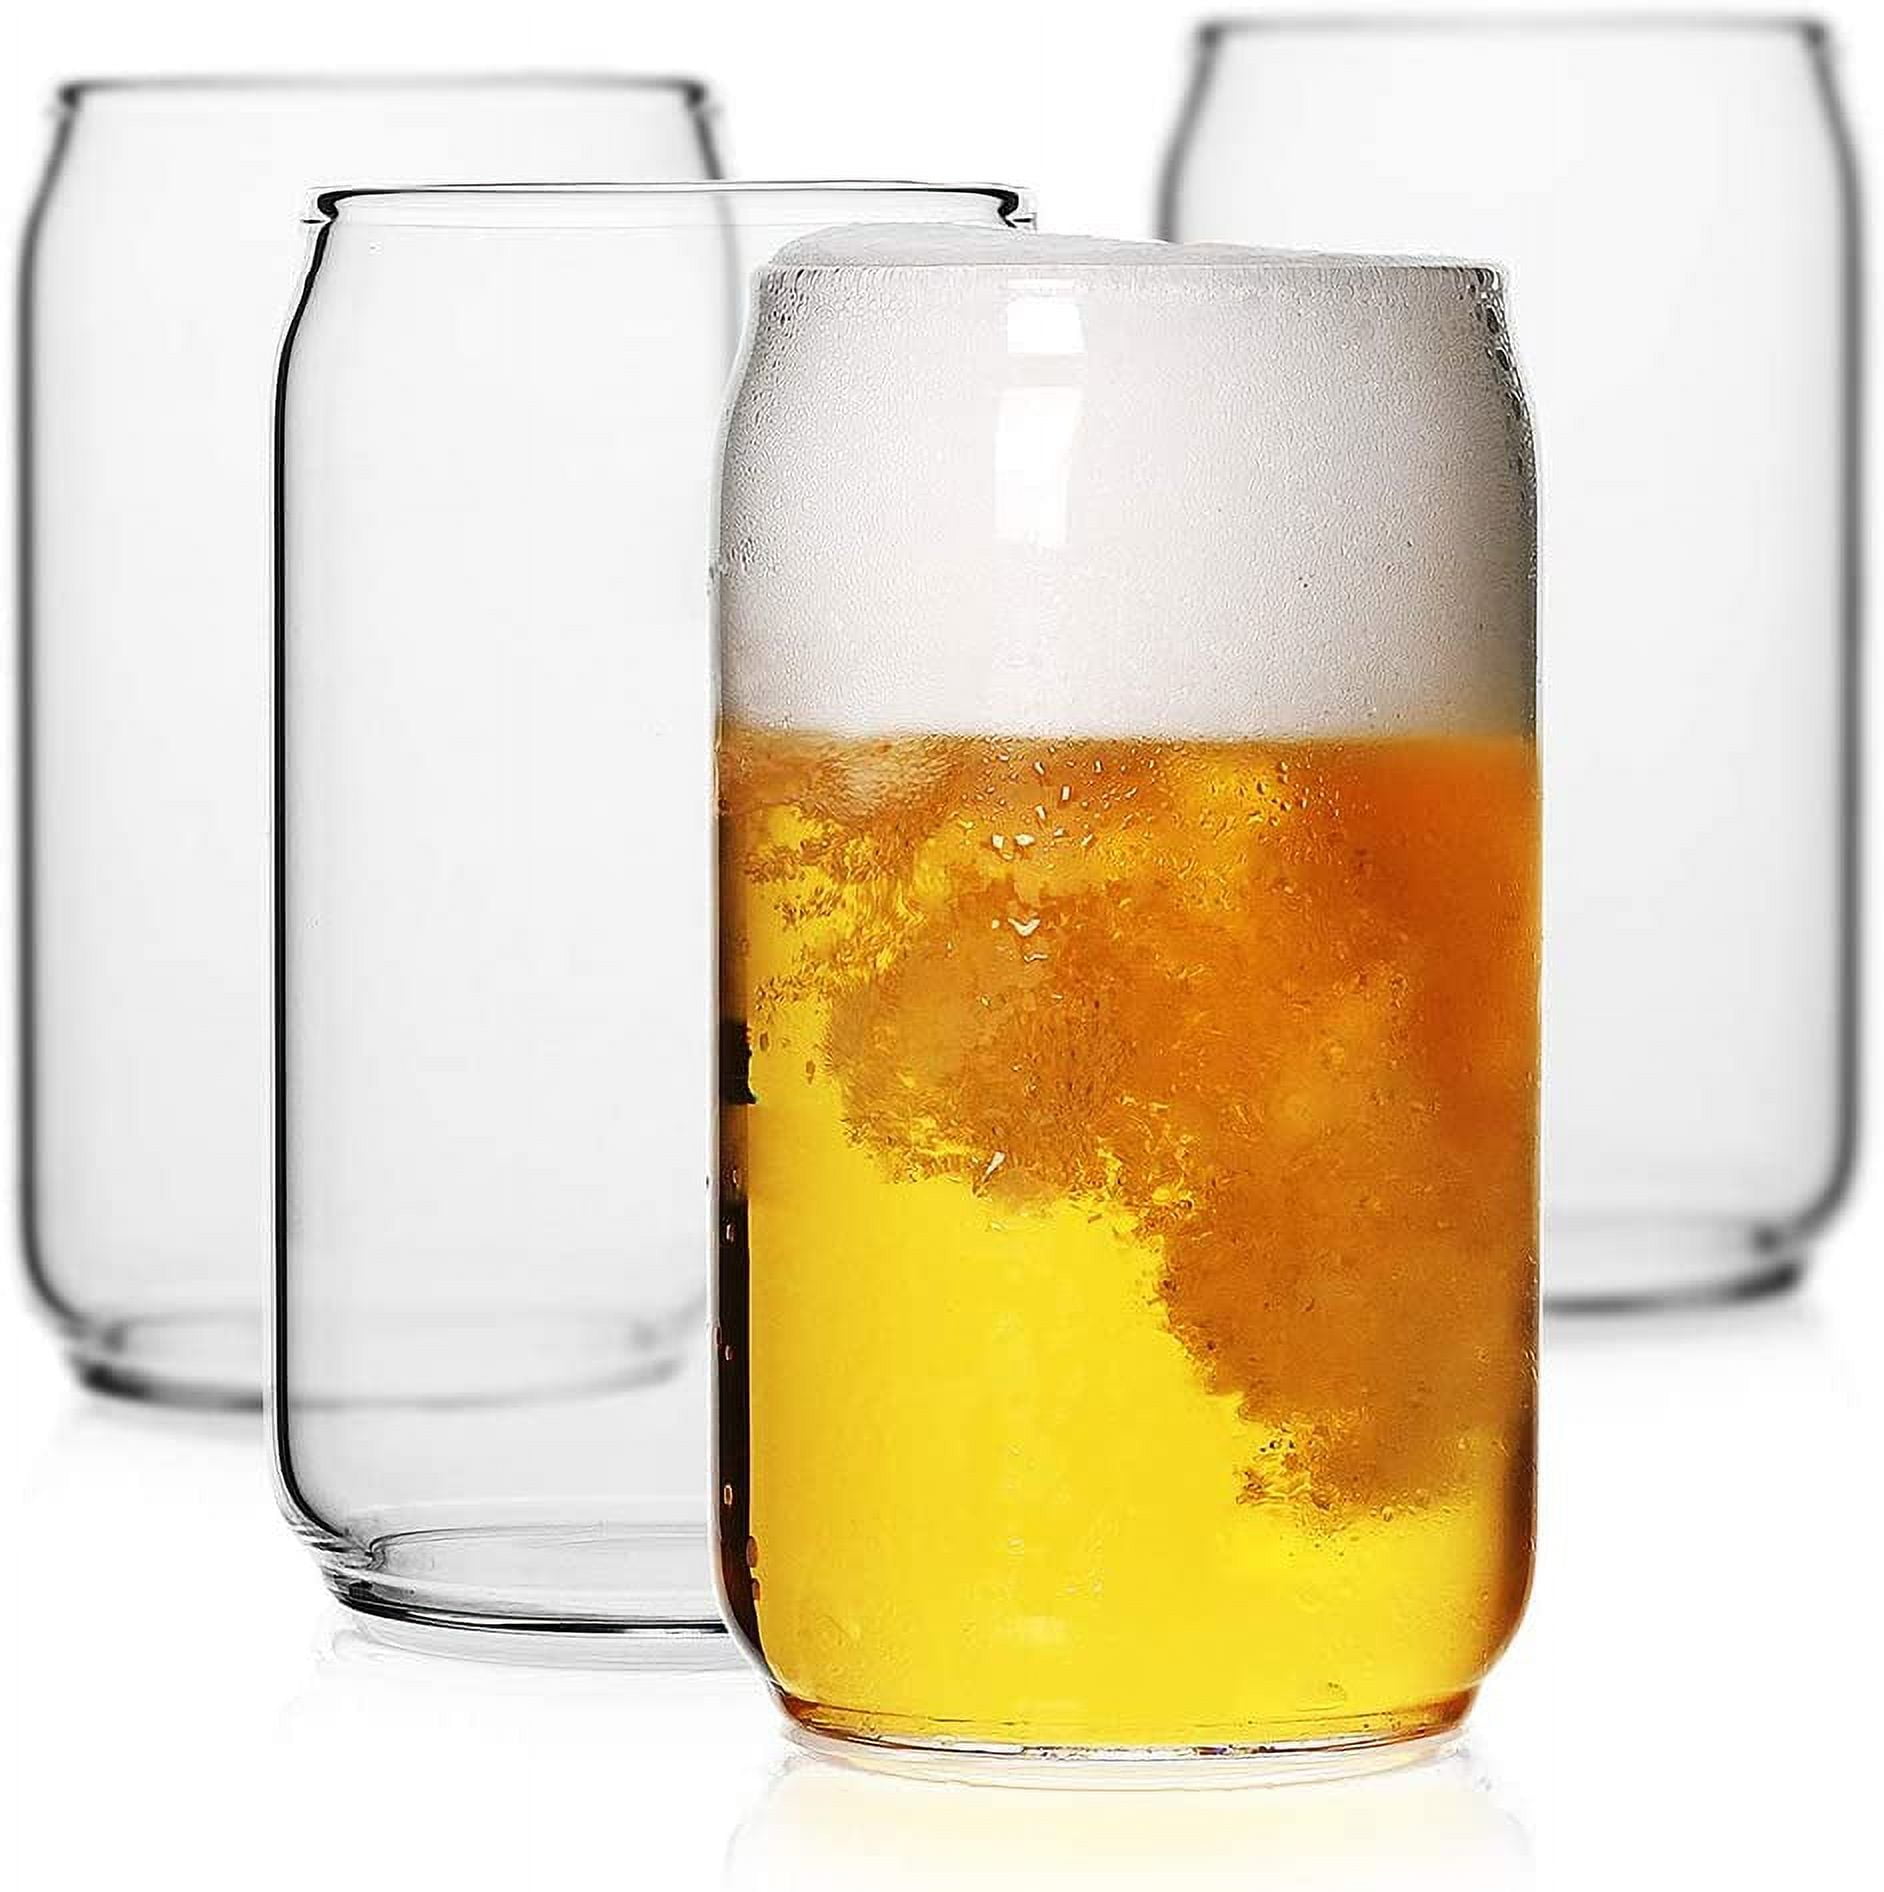 LUXU Beer Glass, 20 oz Can Shaped Beer Glasses Set of 4 -Craft Drinking  Glasses,Large Beer Glasses for Any Drink and Any Occasion